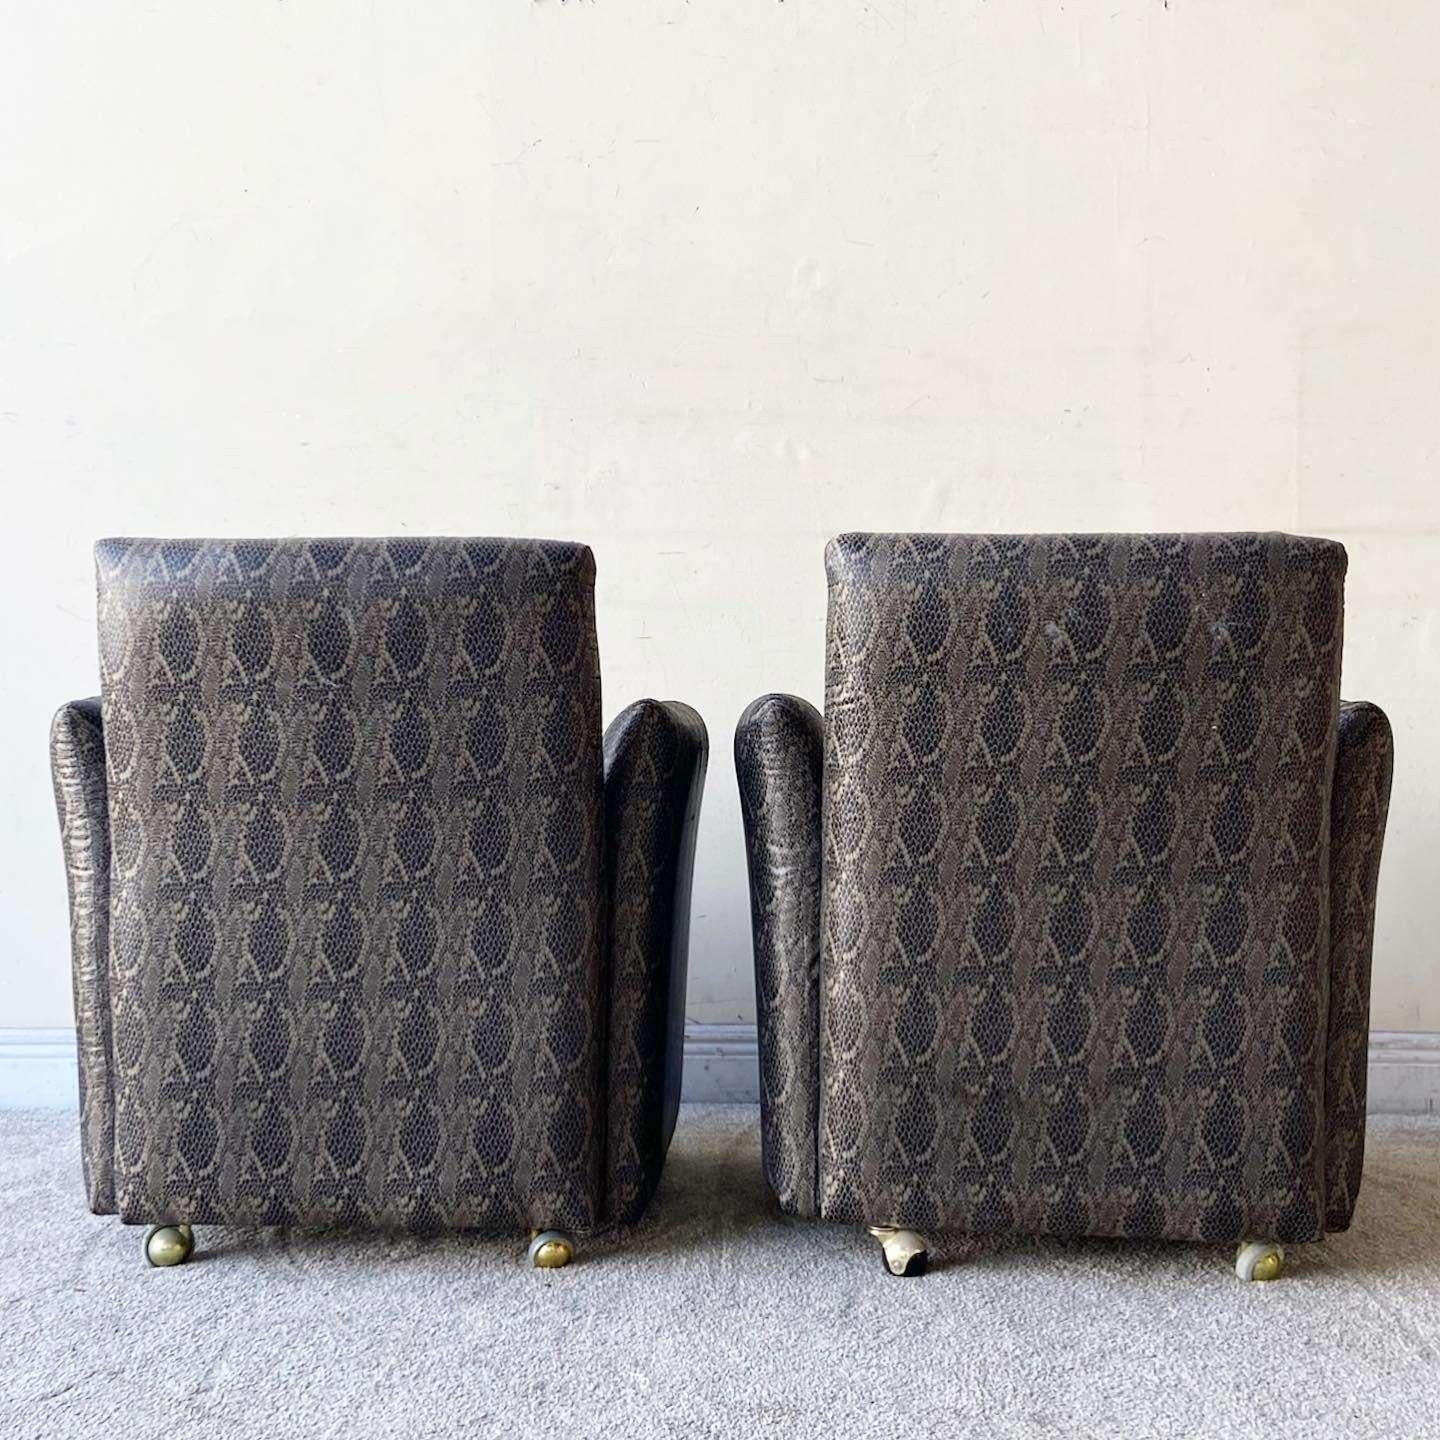 Upholstery Postmodern Faux Snake Skin Upholstered Chiclet Arm Chairs on Wheels - a Pair